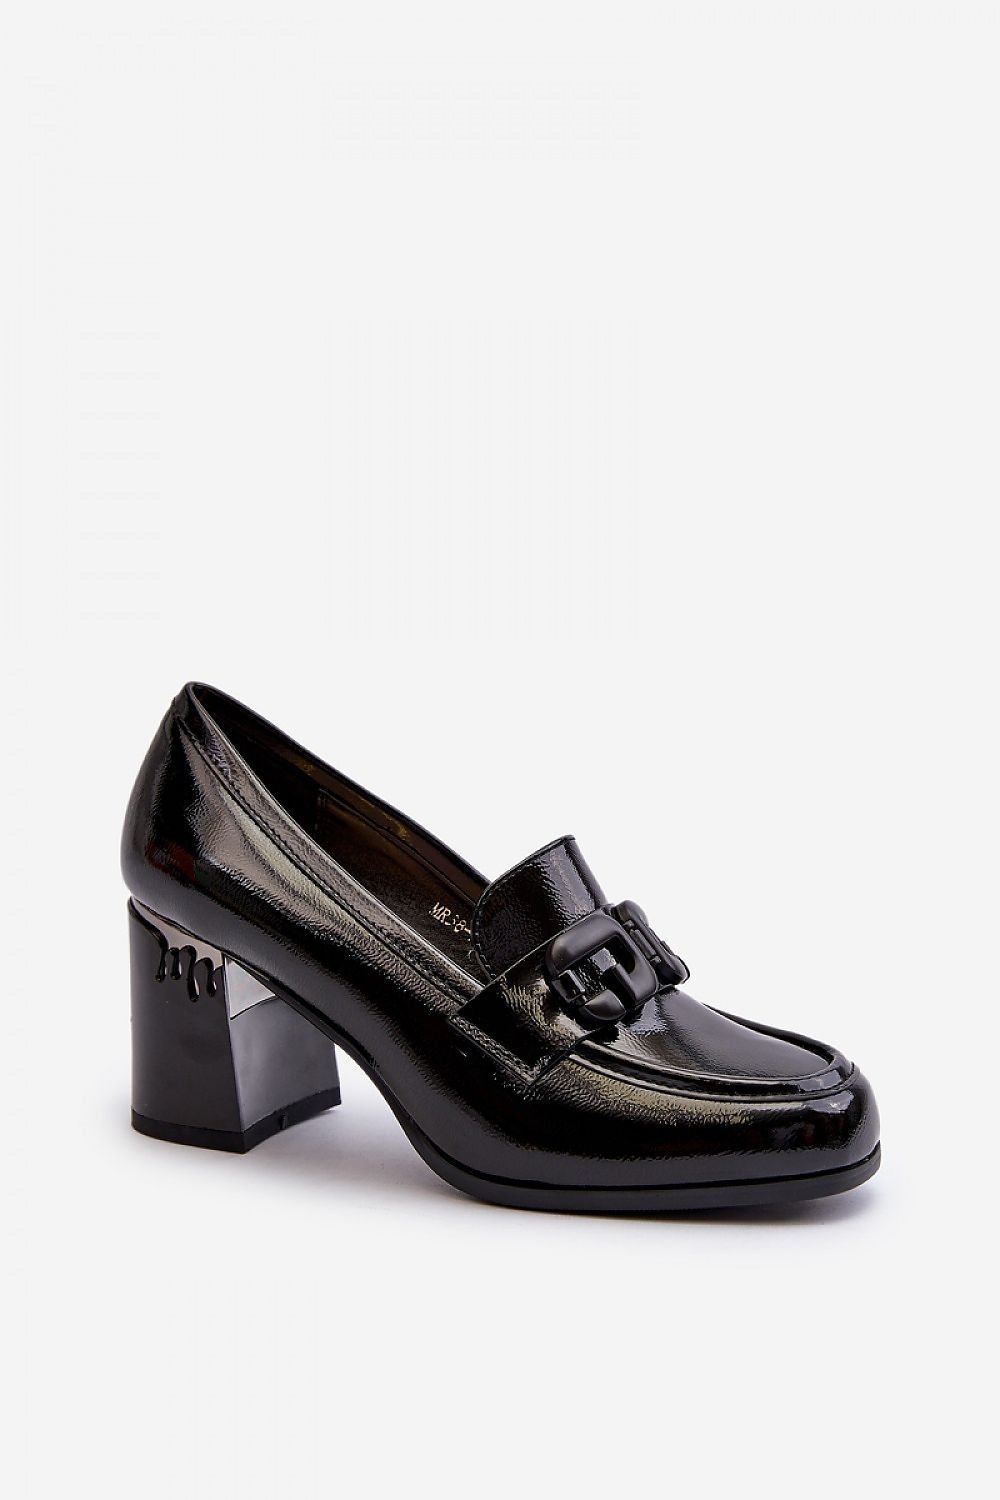 Heeled low shoes model 195397 Step in style